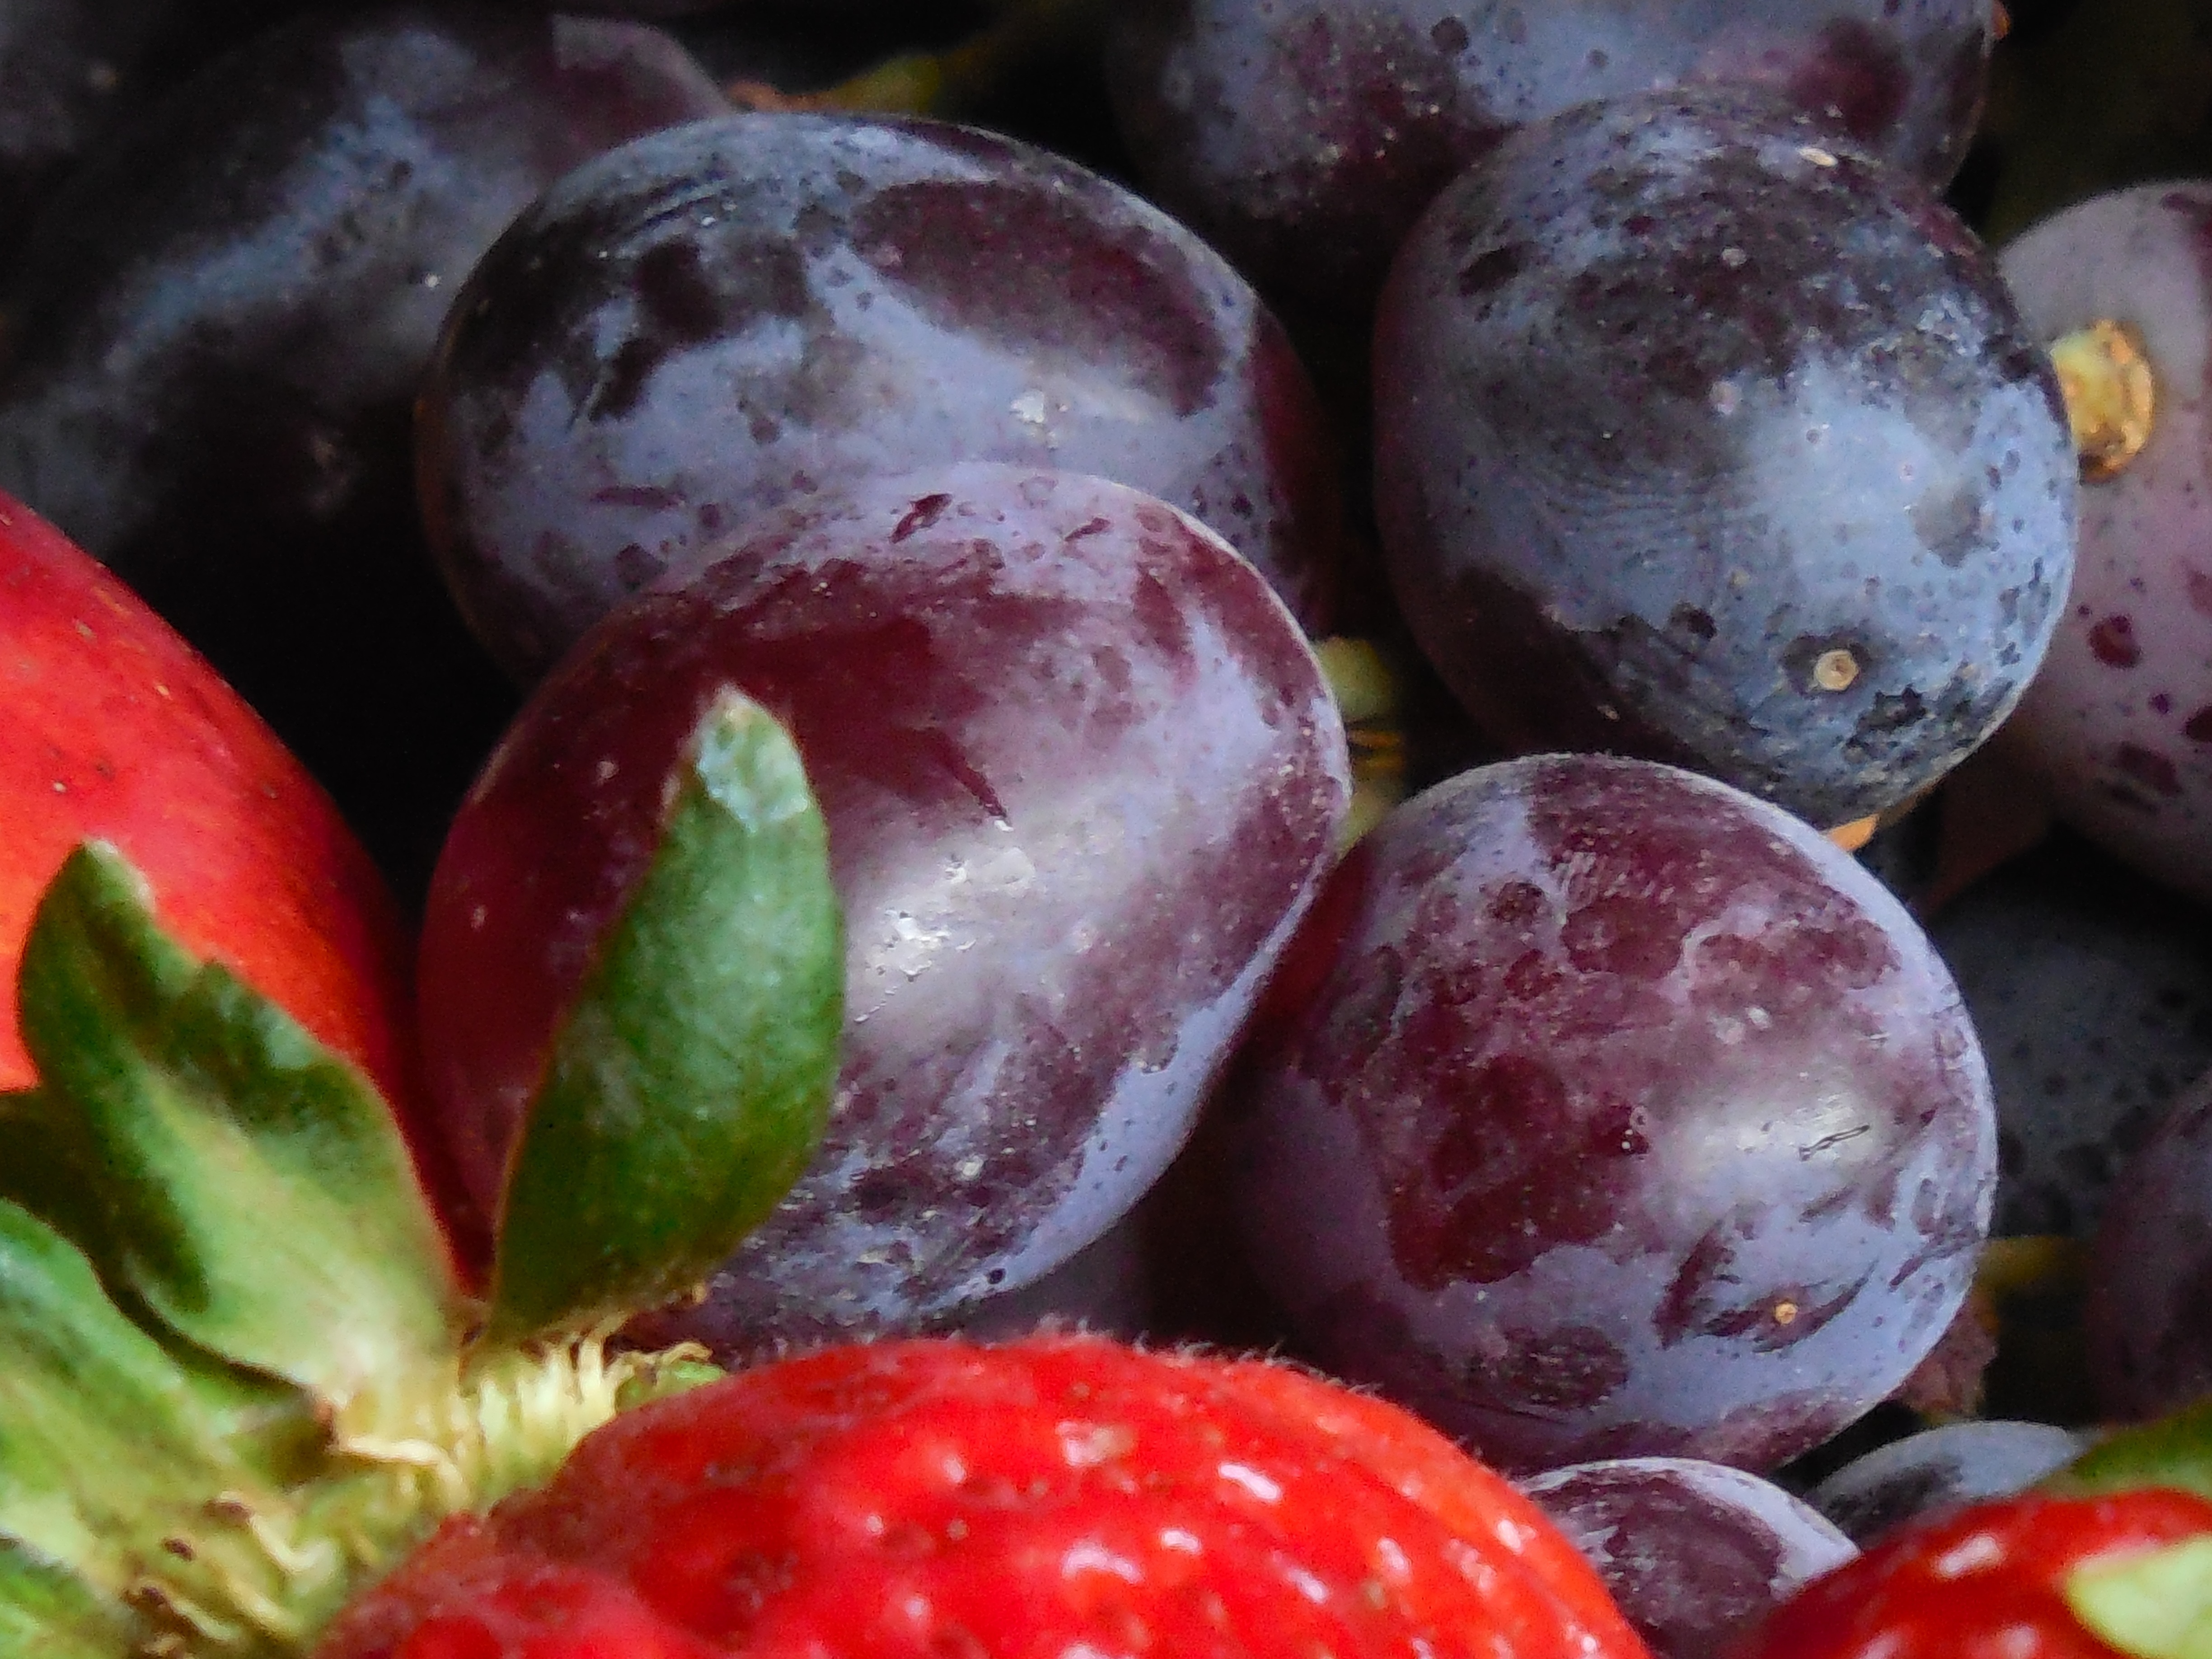 purple grapes and red strawberry